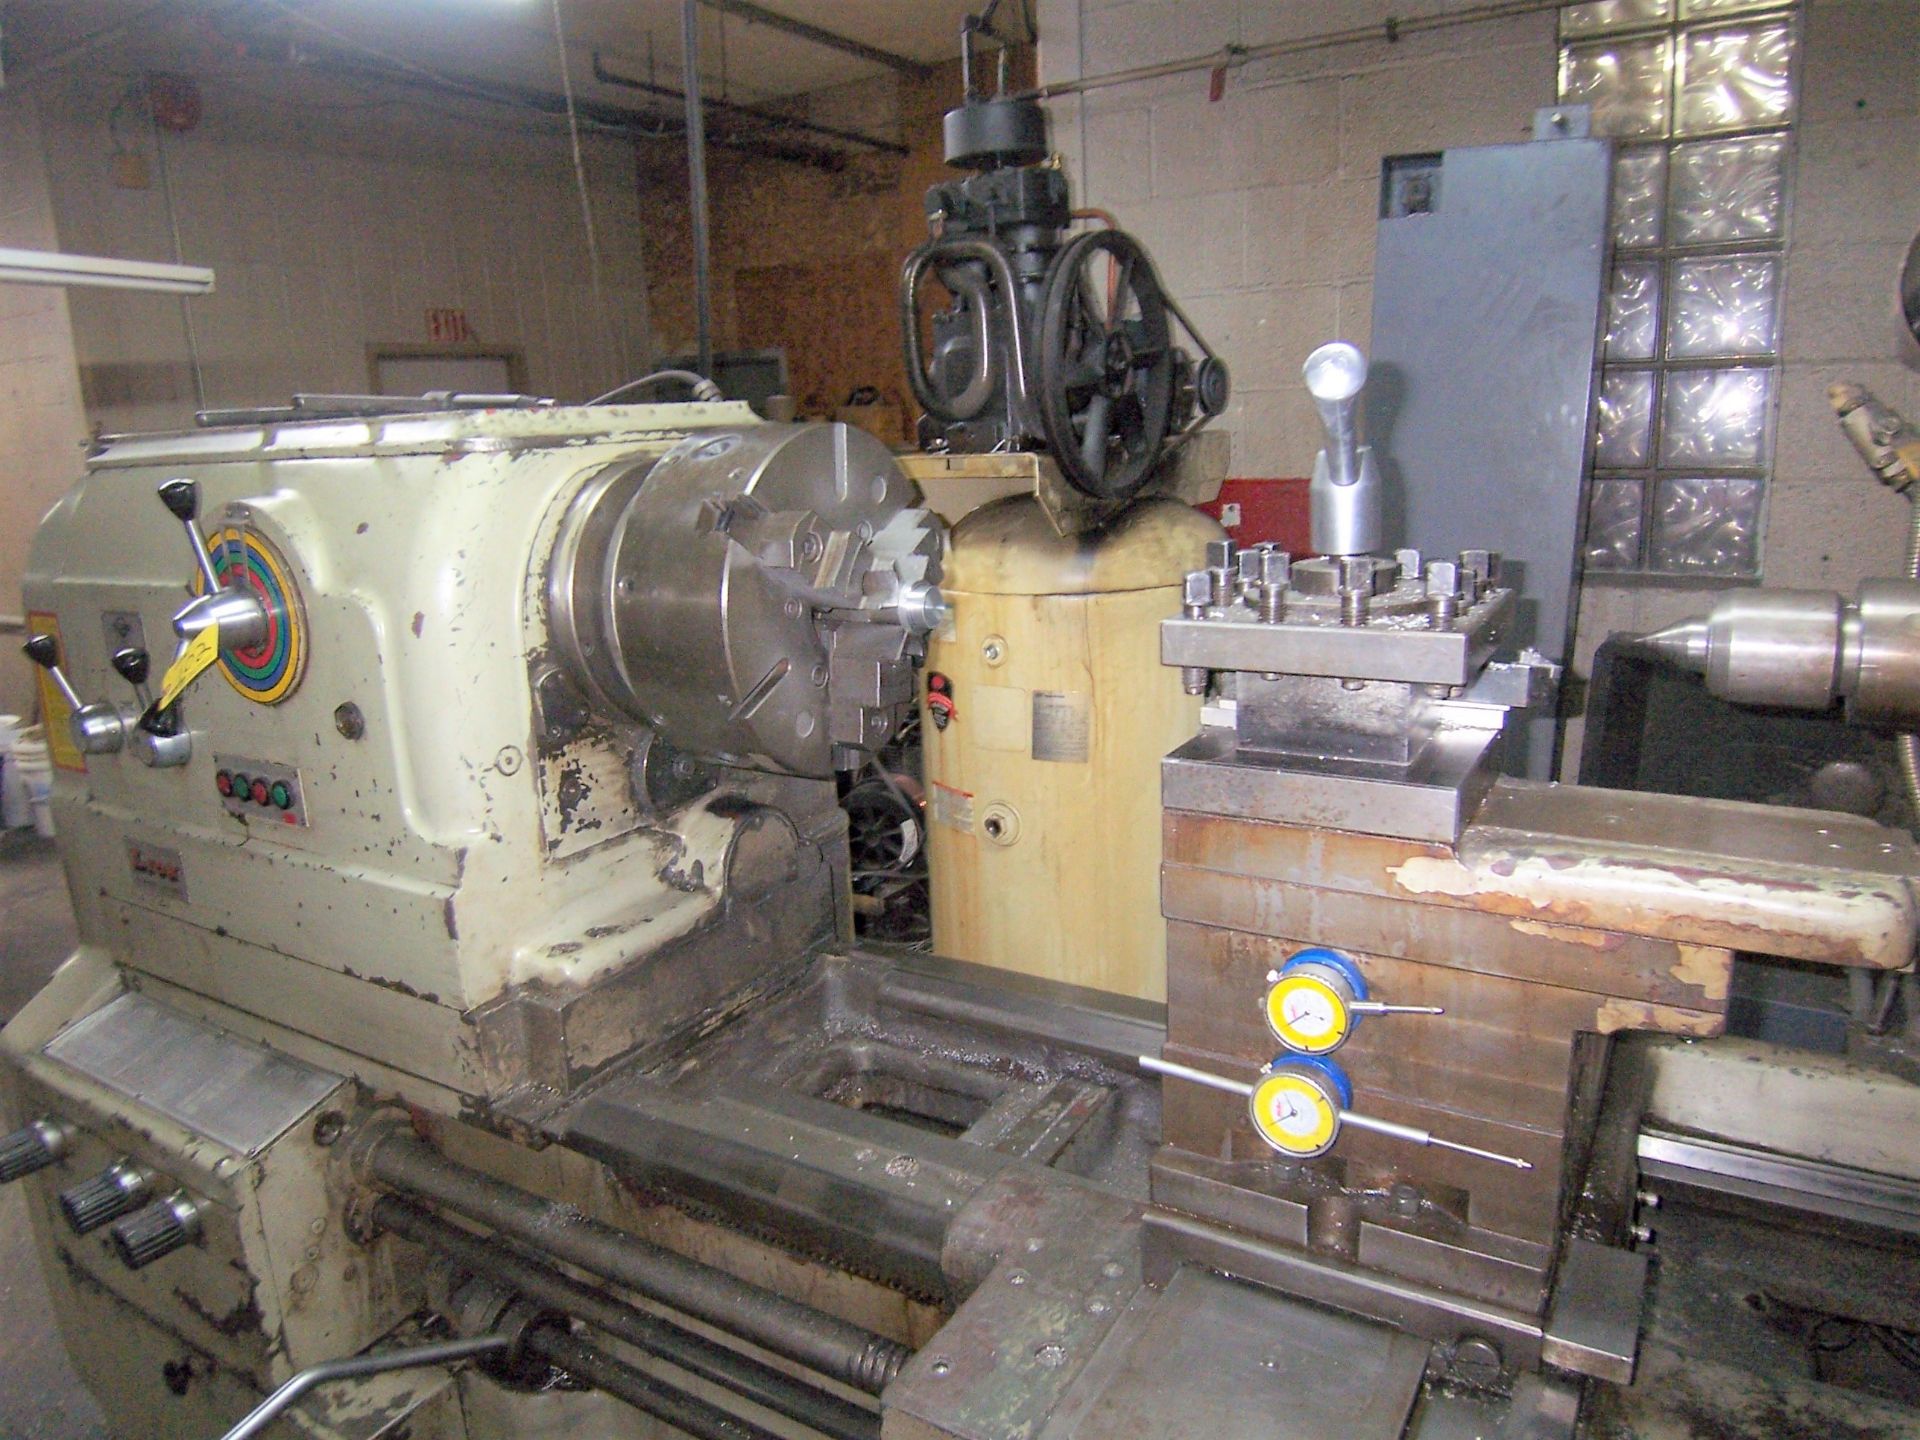 38"/44" X 87" LION GNP BED LATHE WITH 4-1/8" HOLD THRU SPINDLE, SPINDLE SPEEDS 8-1000 RPM, INCH/ - Image 6 of 6